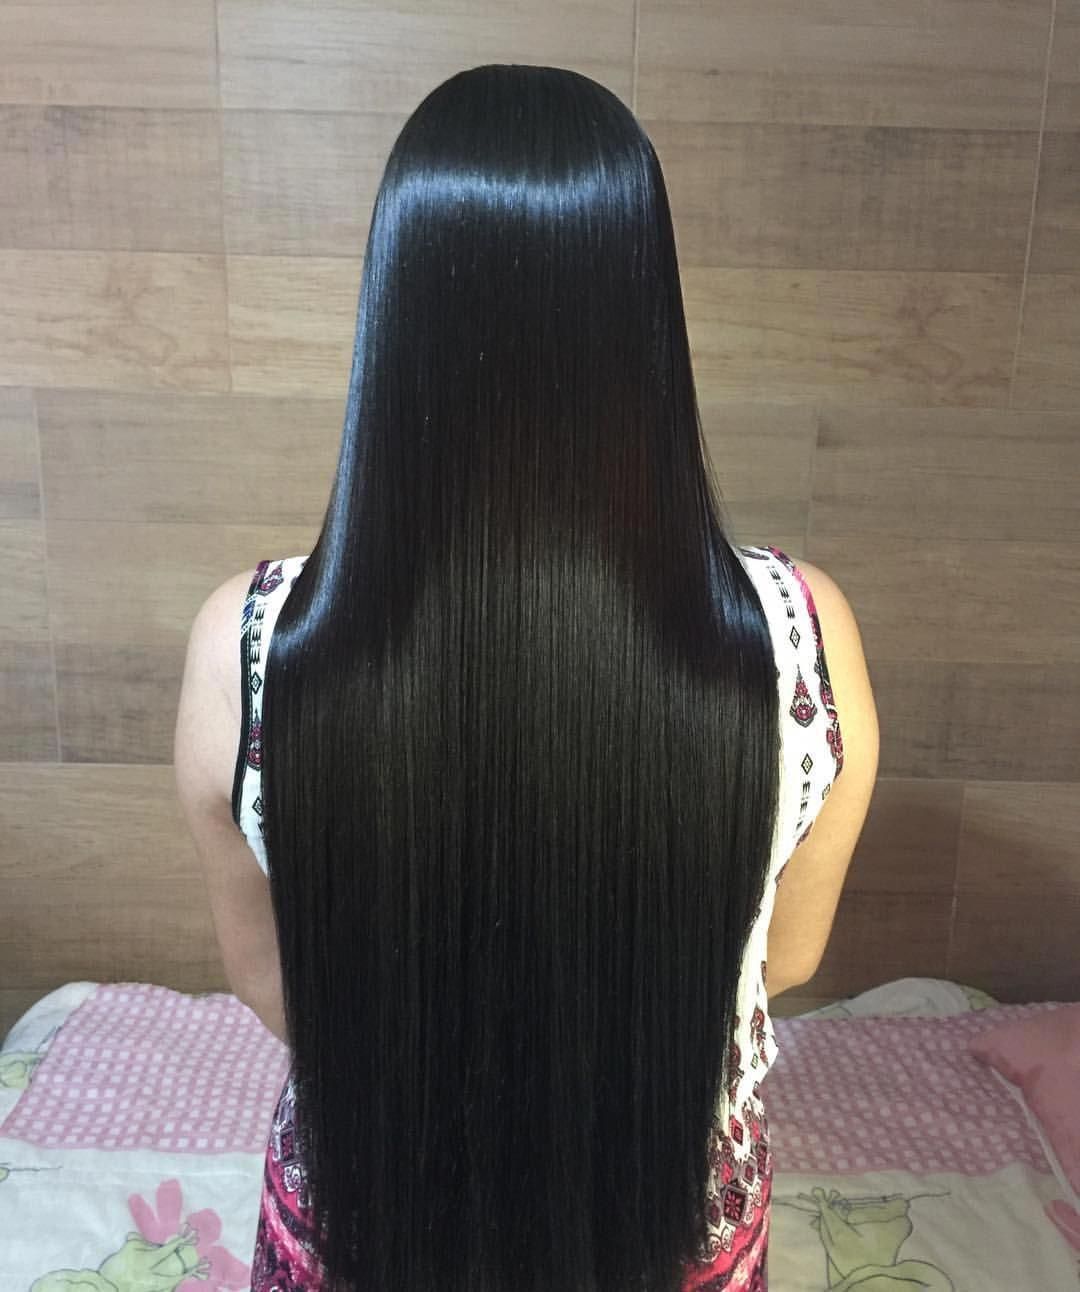  Natural Color Remy Human Hair Malaysian Straight Bulk Hair  8-30 Inches Crochet Braids No Weft Hair Bulk Natural Color 28 28 30 30 :  Beauty & Personal Care